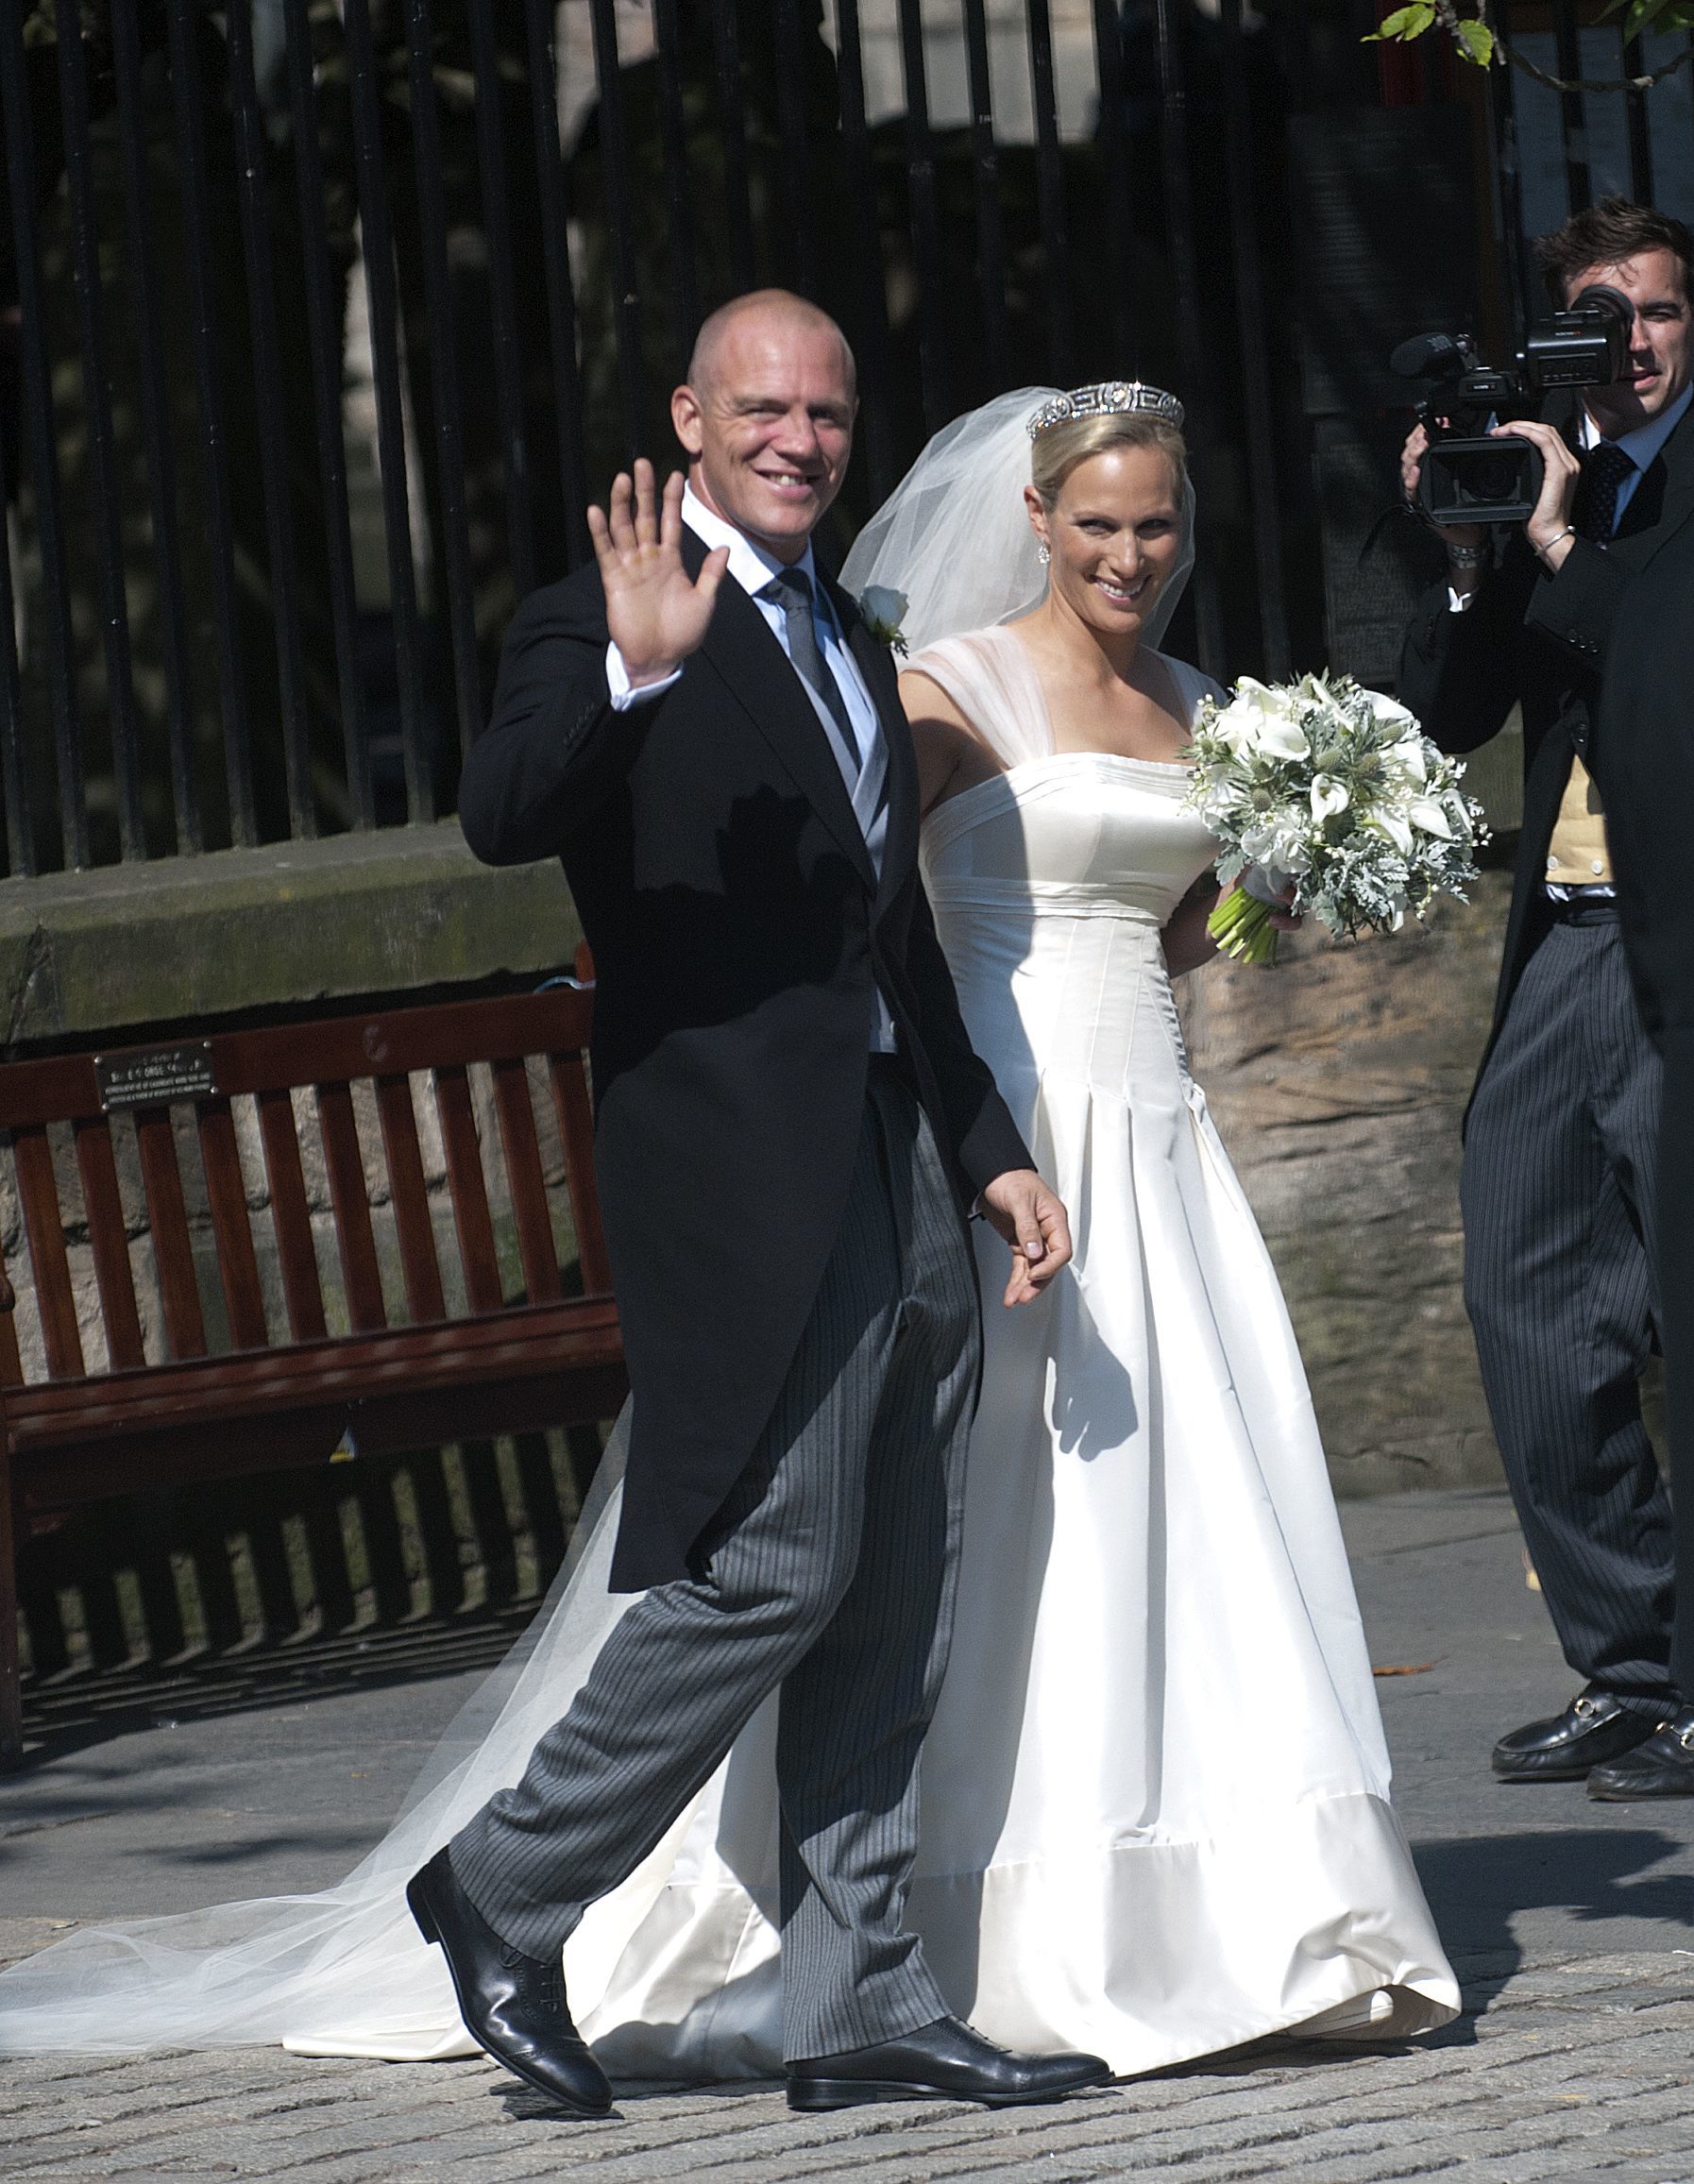 <p>Princess Anne's daughter, Zara Phillips, is pictured on her wedding day with new husband Mike Tindall outside Canongate Kirk in Edinburgh, Scotland, on July 30, 2011.</p>